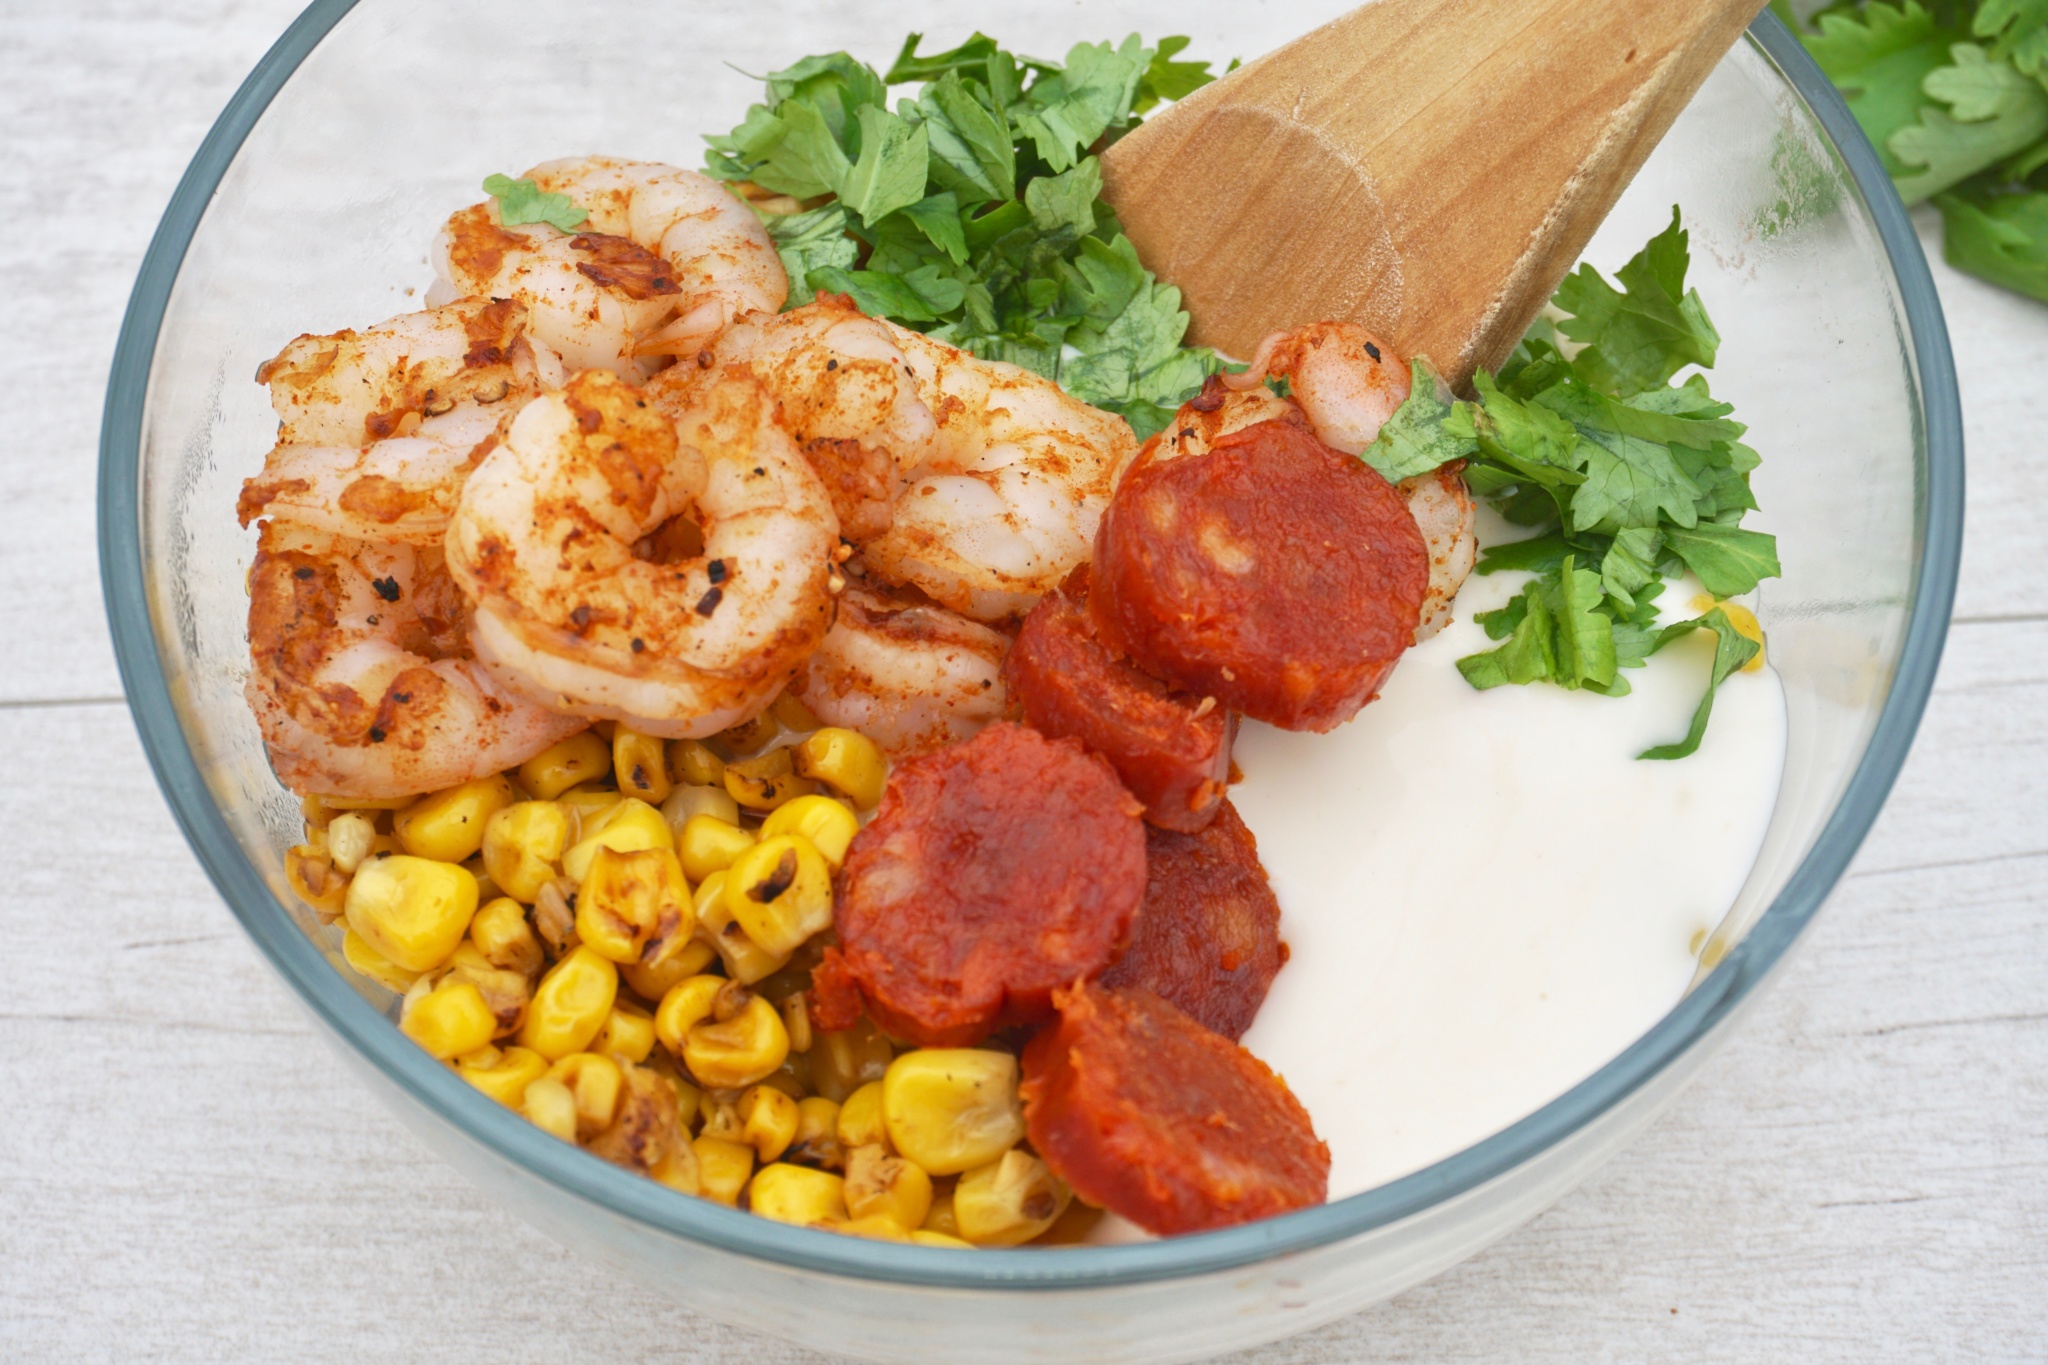 Charred Mexican Corn Salad with Shrimp and Chorizo recipe with Texas Pete hot sauce